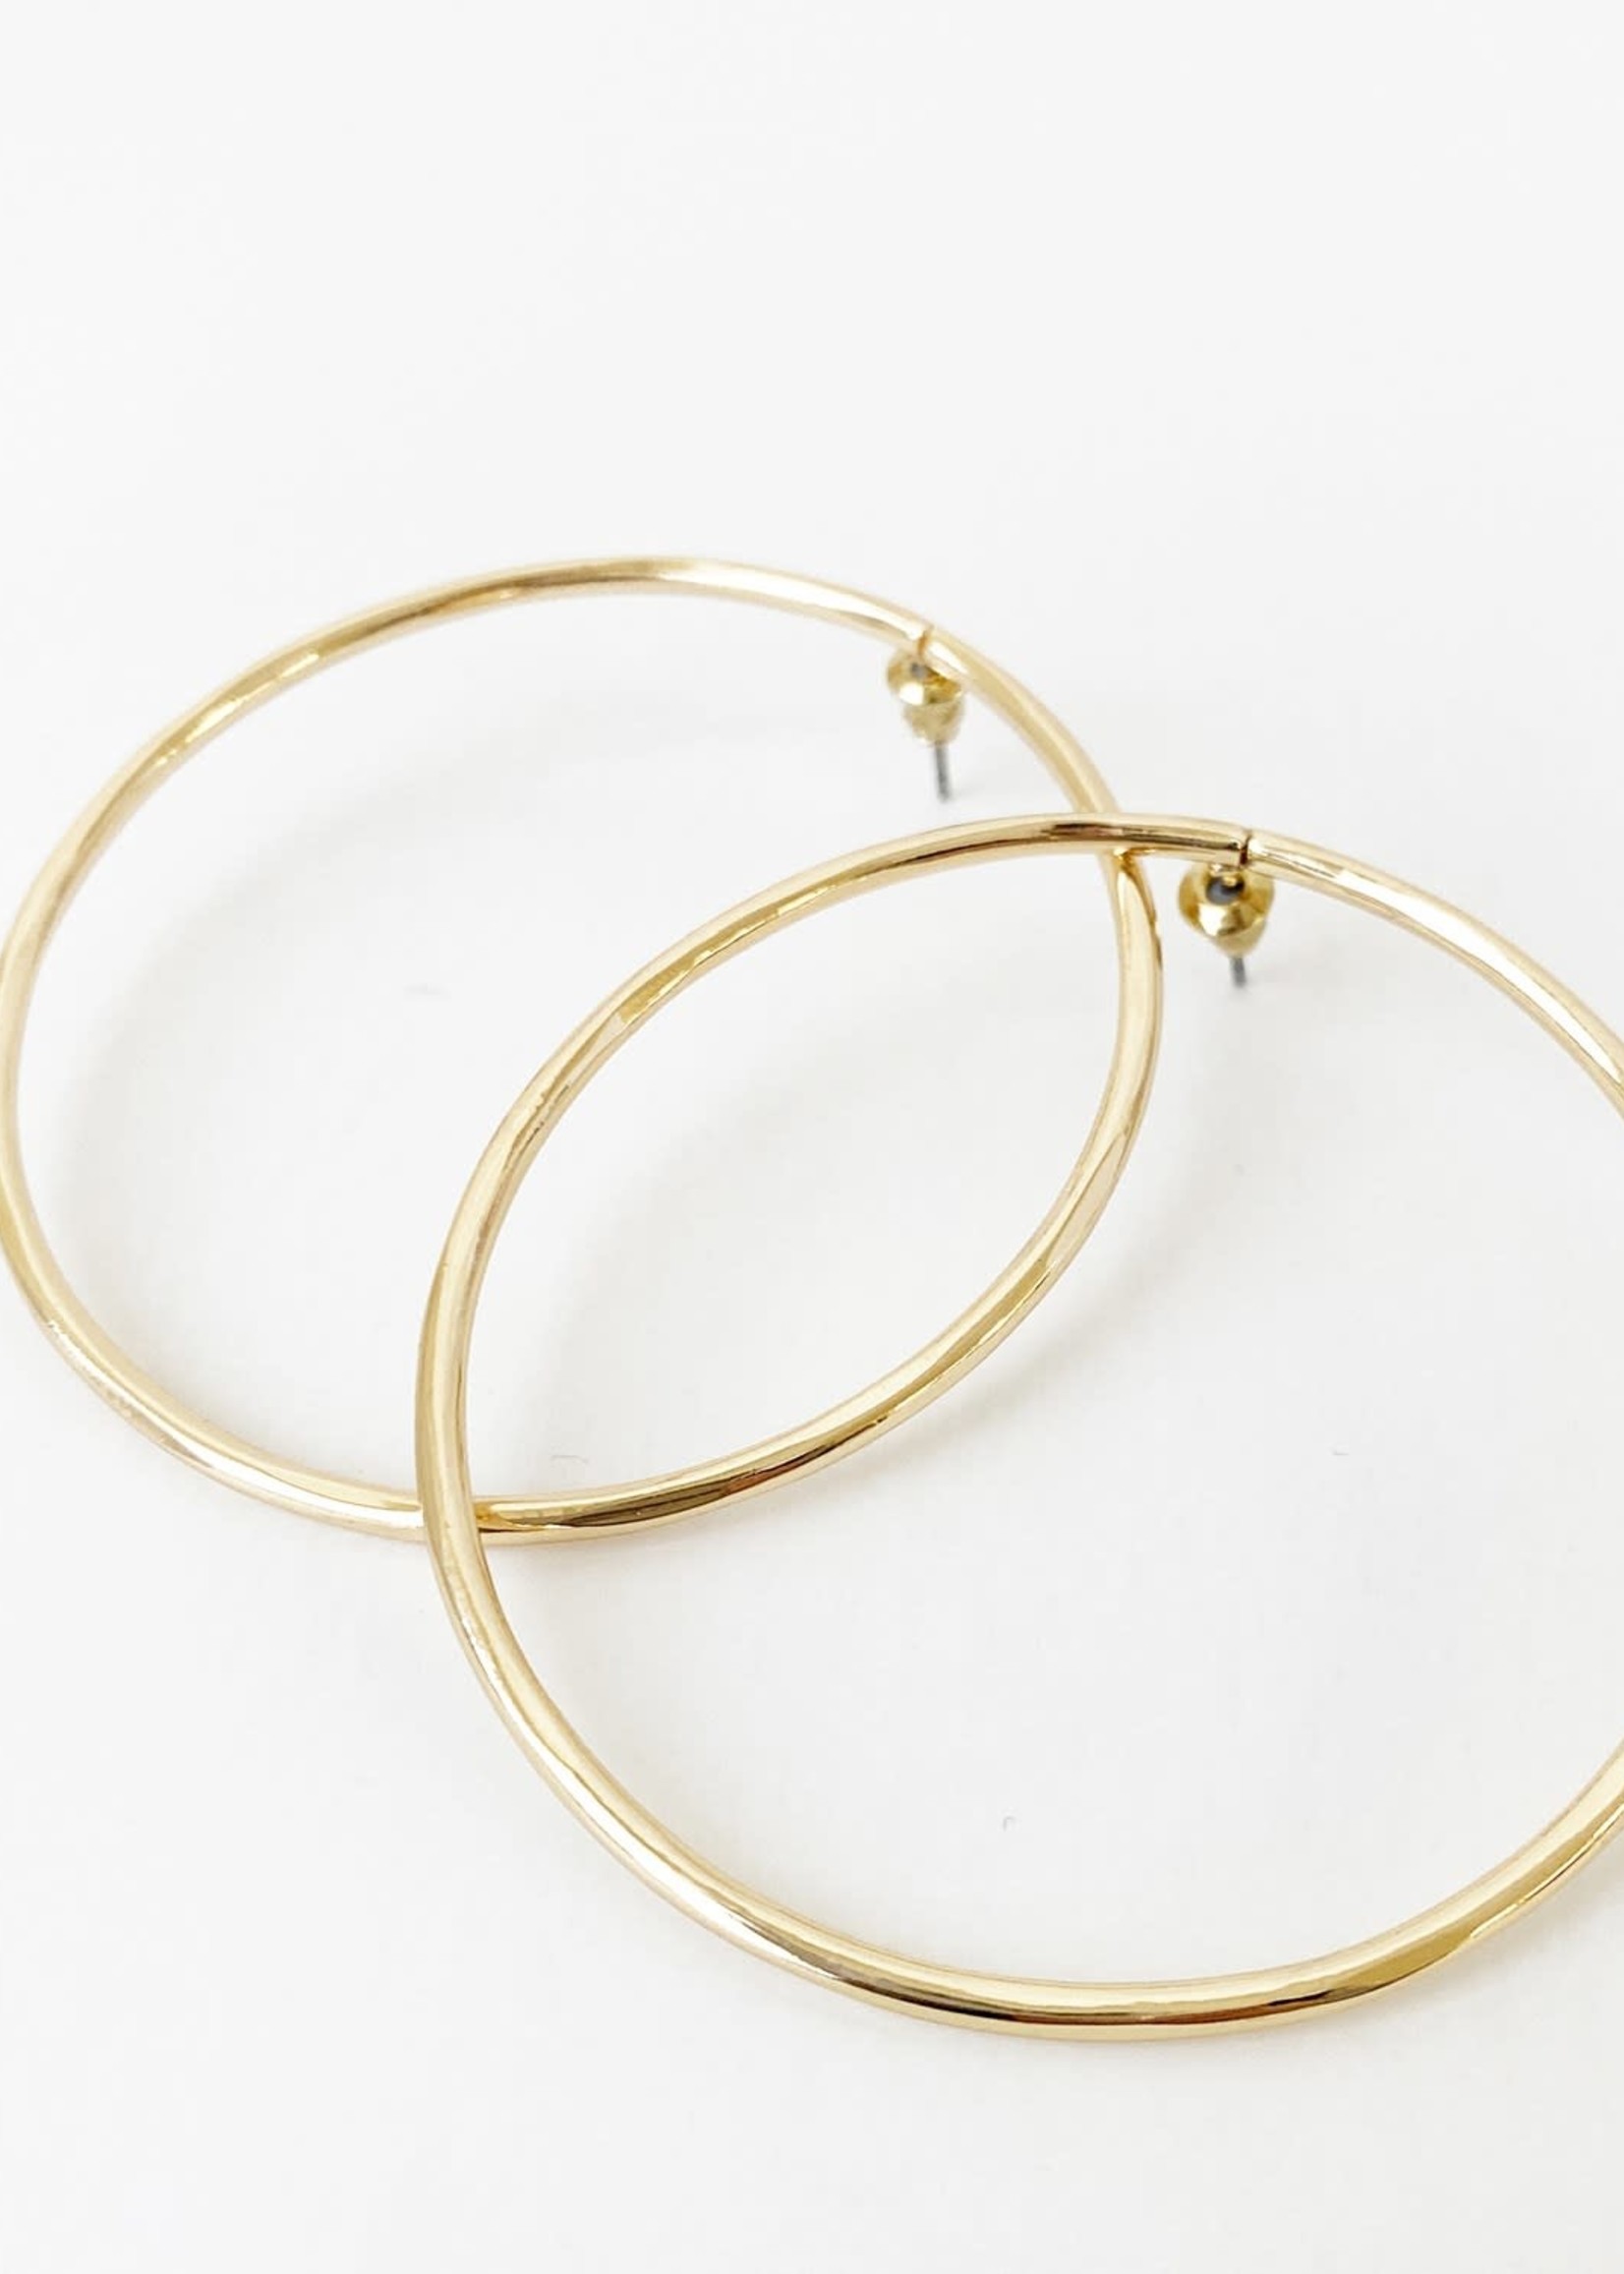 Caracol Caracol Shiny Gold Delicate & Big Hoop Earrings 2481-GLD-S